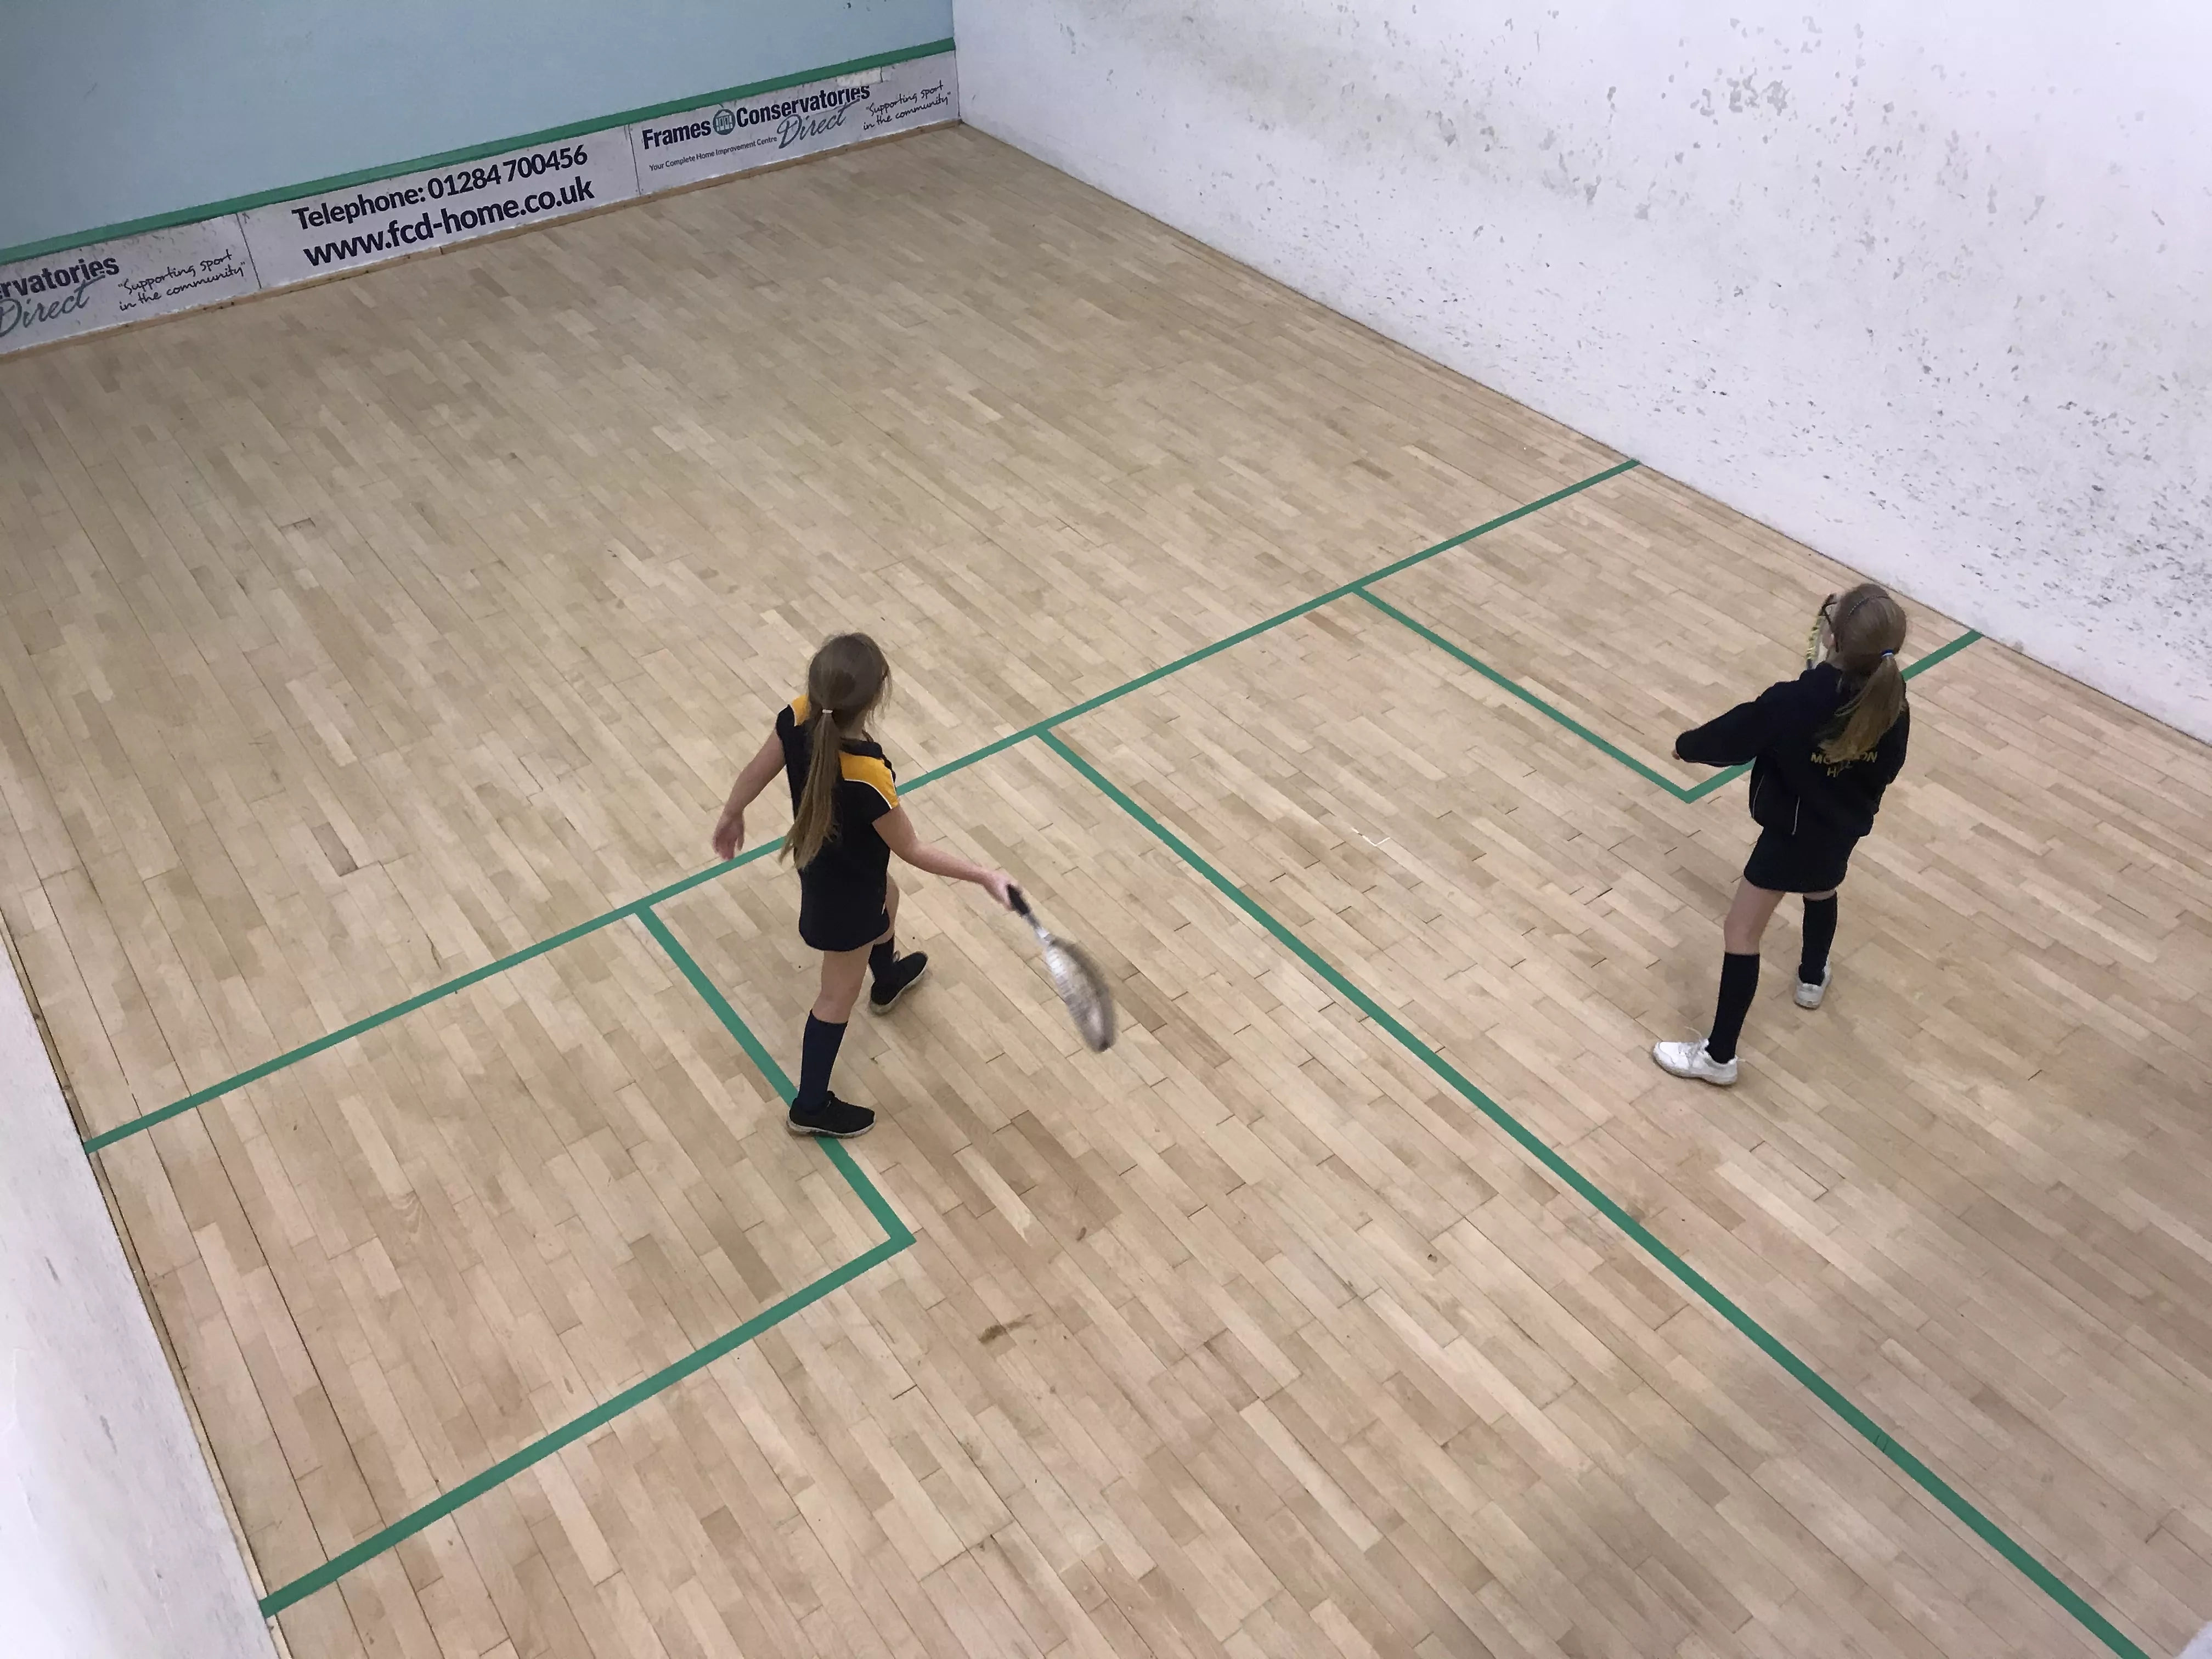 Wanderers Squash Club in South Africa, Africa | Squash - Rated 1.6